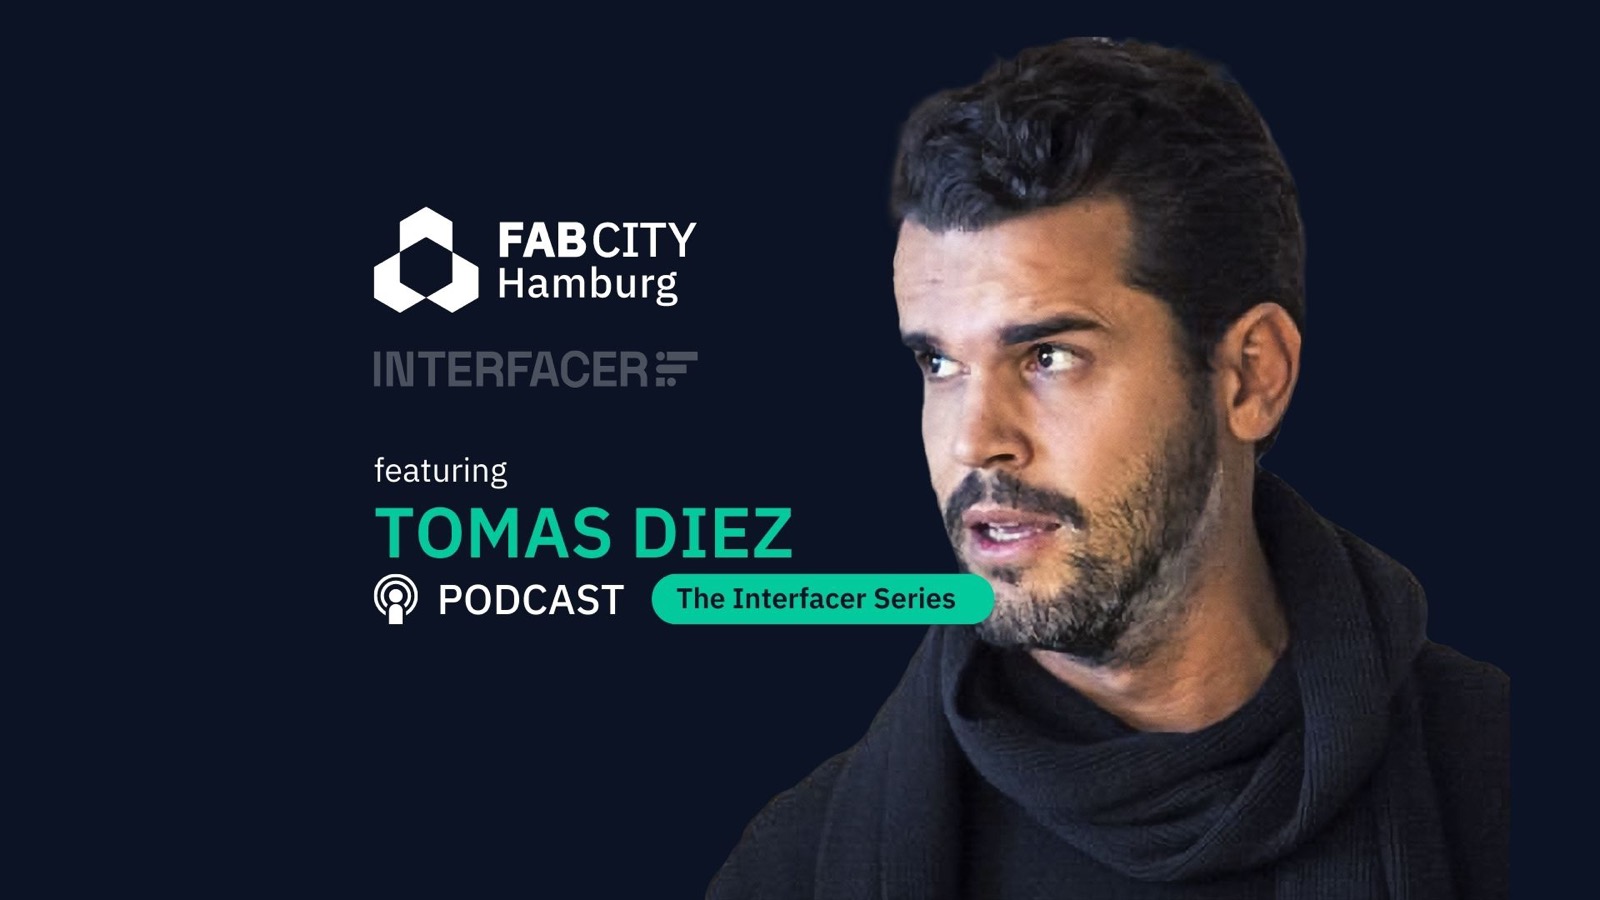 Tomas Diez on a dark background. The FabCity and Interfacer logo can be seen.